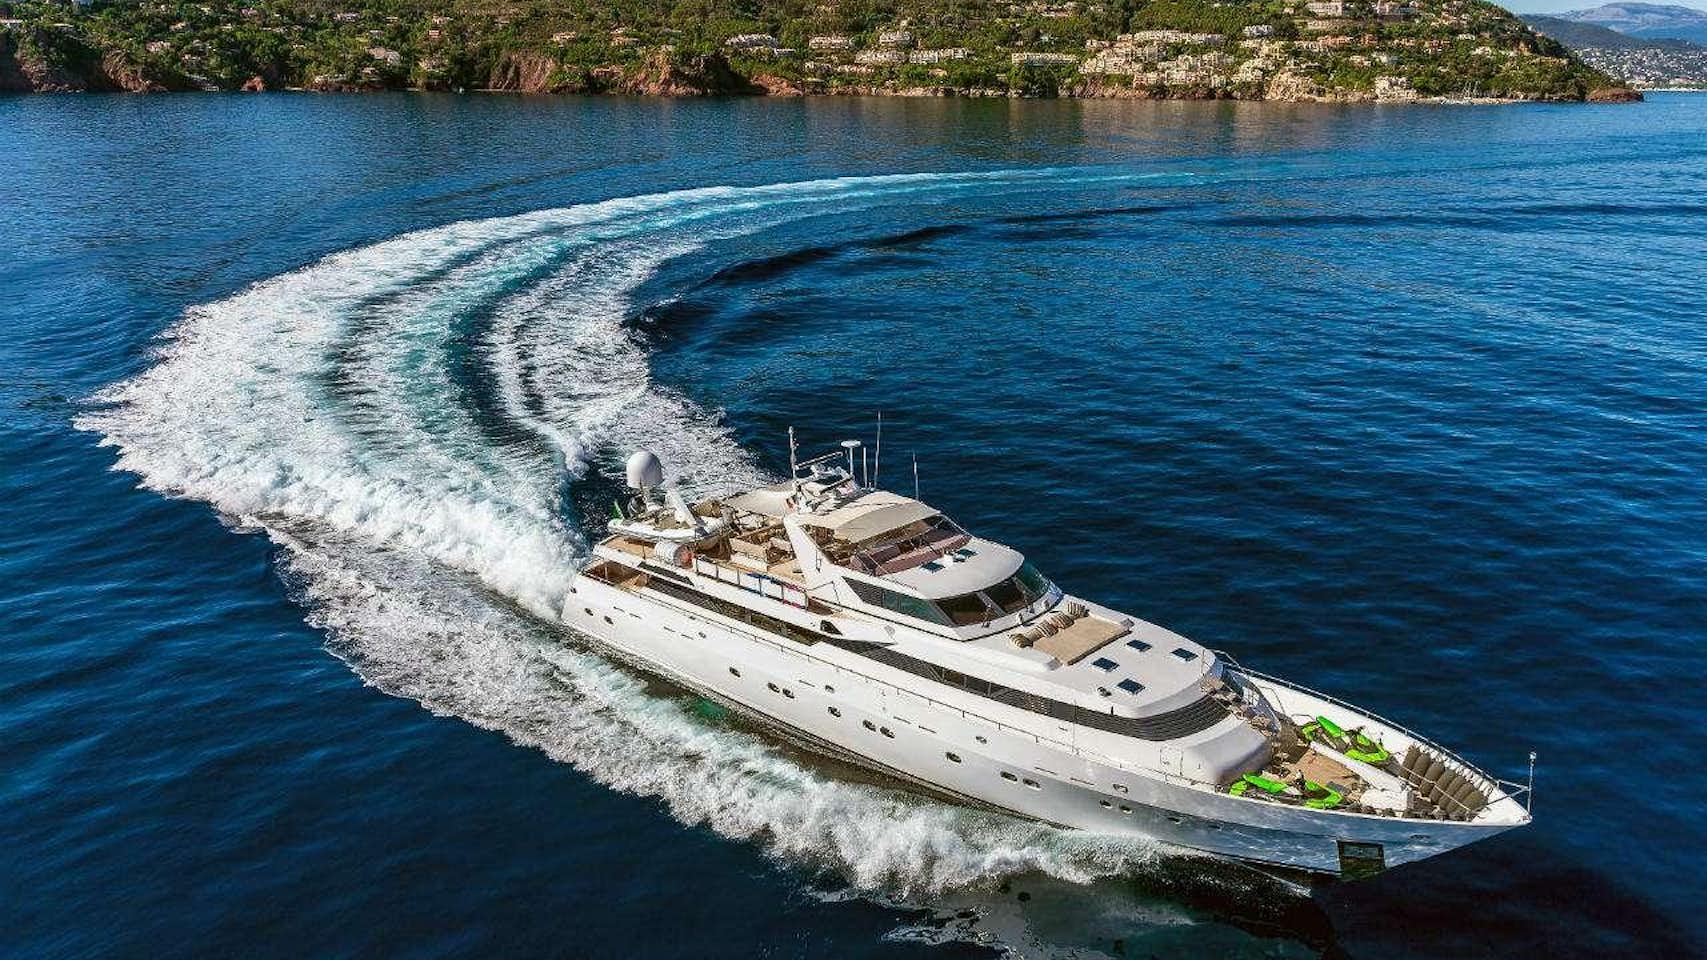 Watch Video for SUNLINER X Yacht for Charter